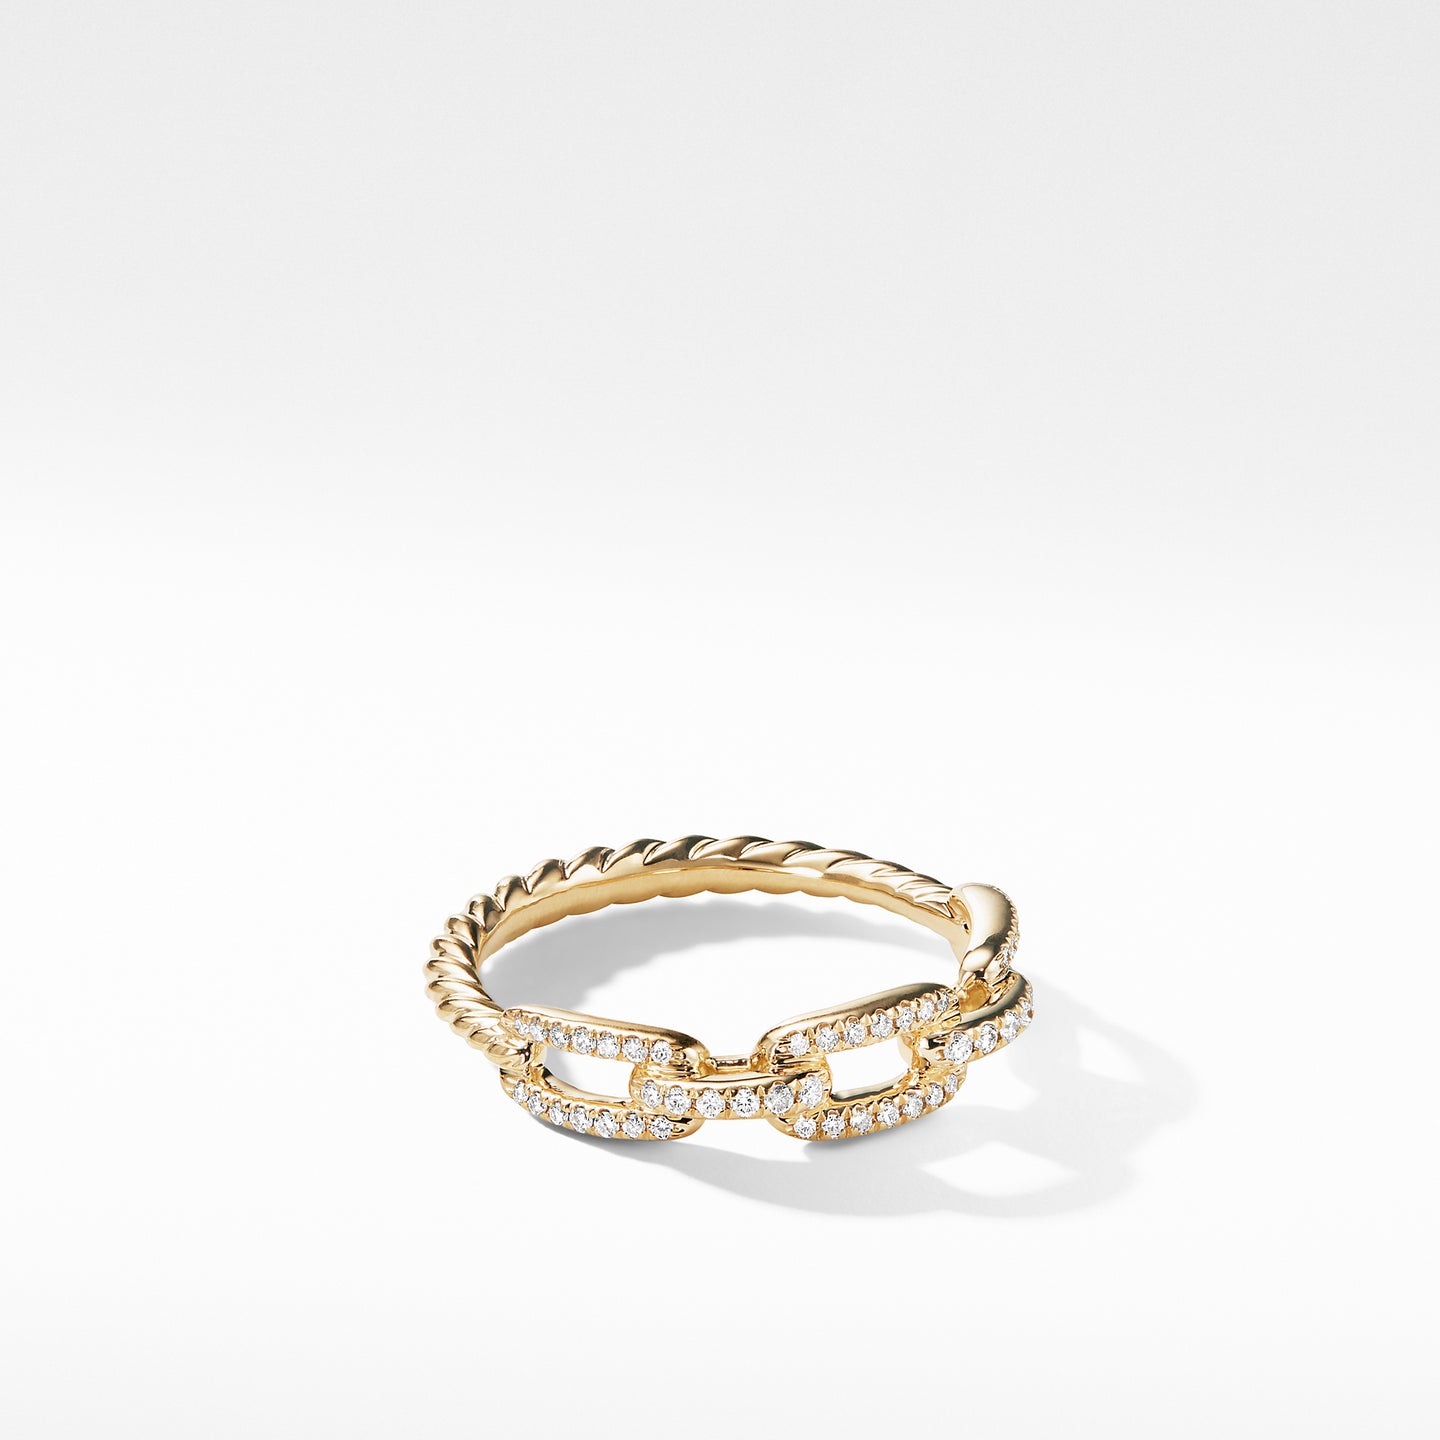 Stax Single Row Pavé Chain Link Ring with Diamonds in 18K Gold, 4.5mm, Size 6